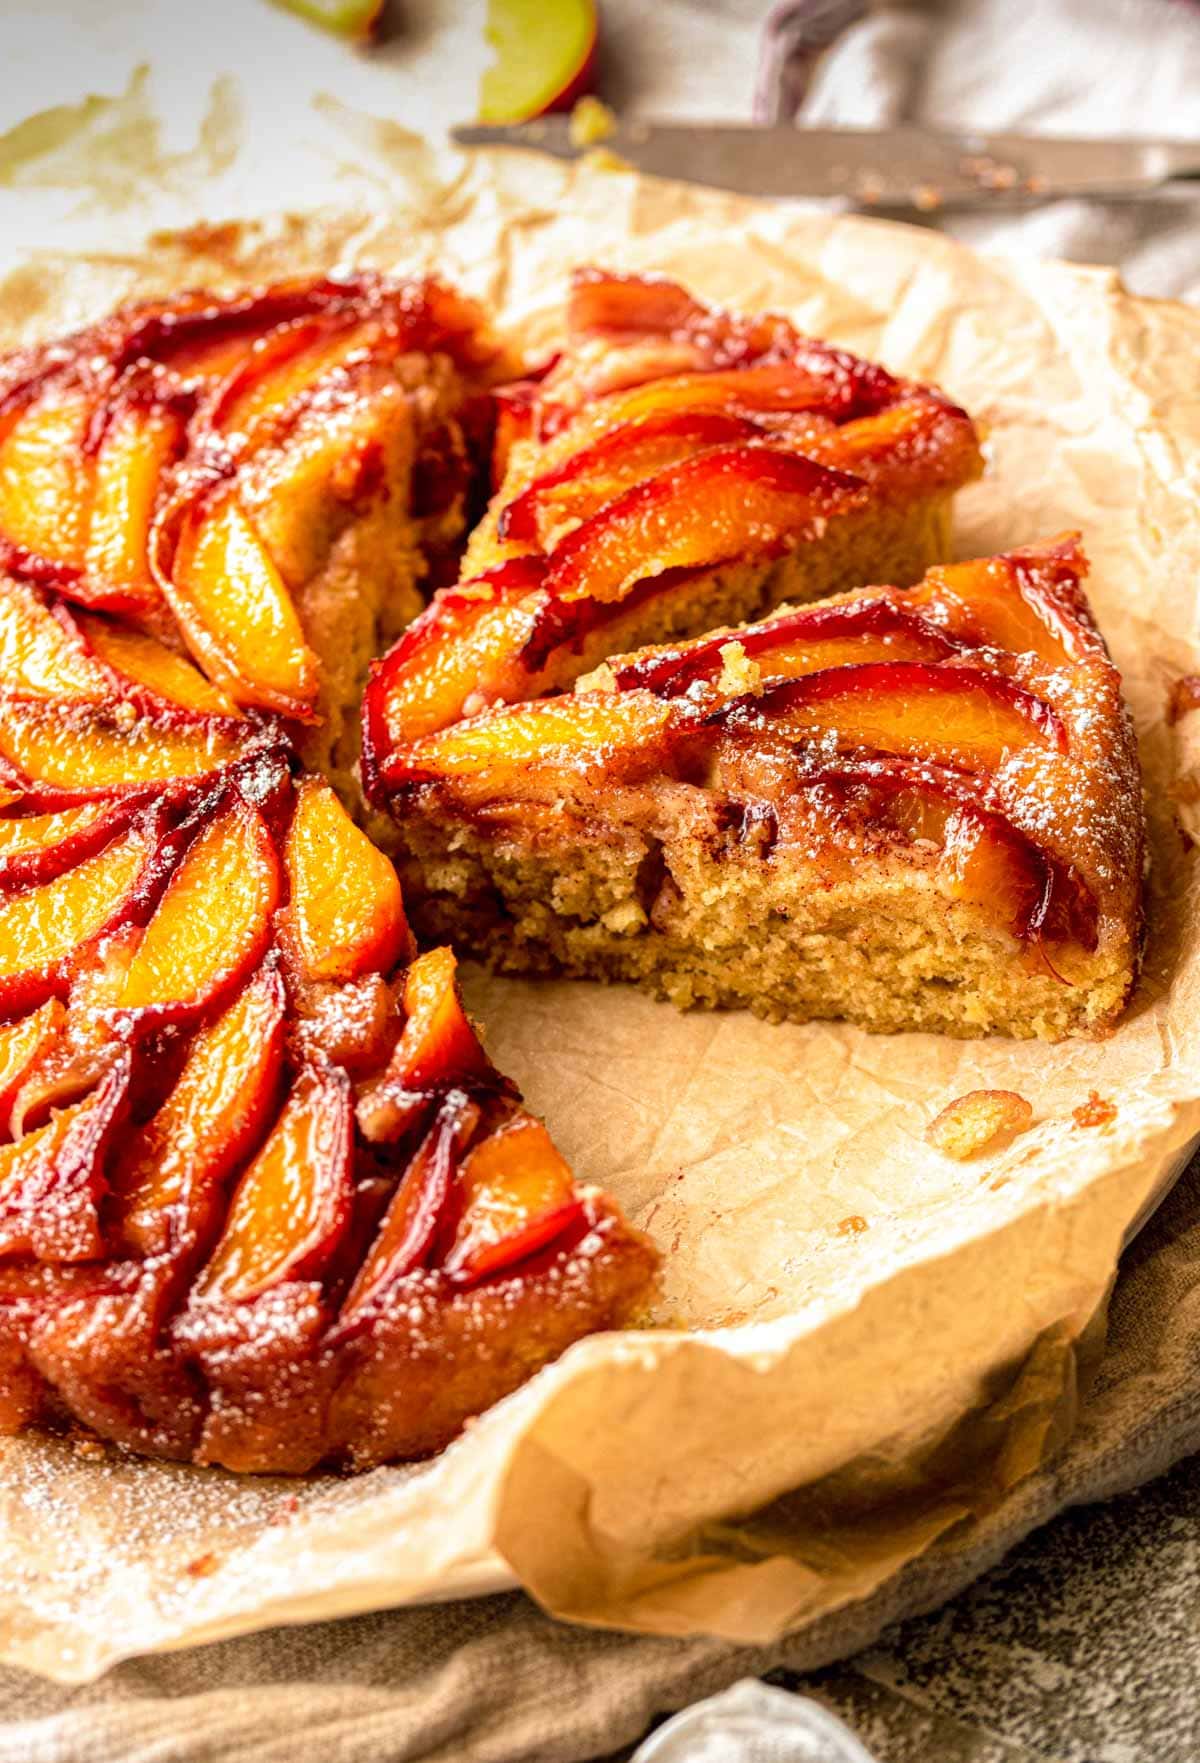 Peach upside down cake with slices cut out showing the cake texture.